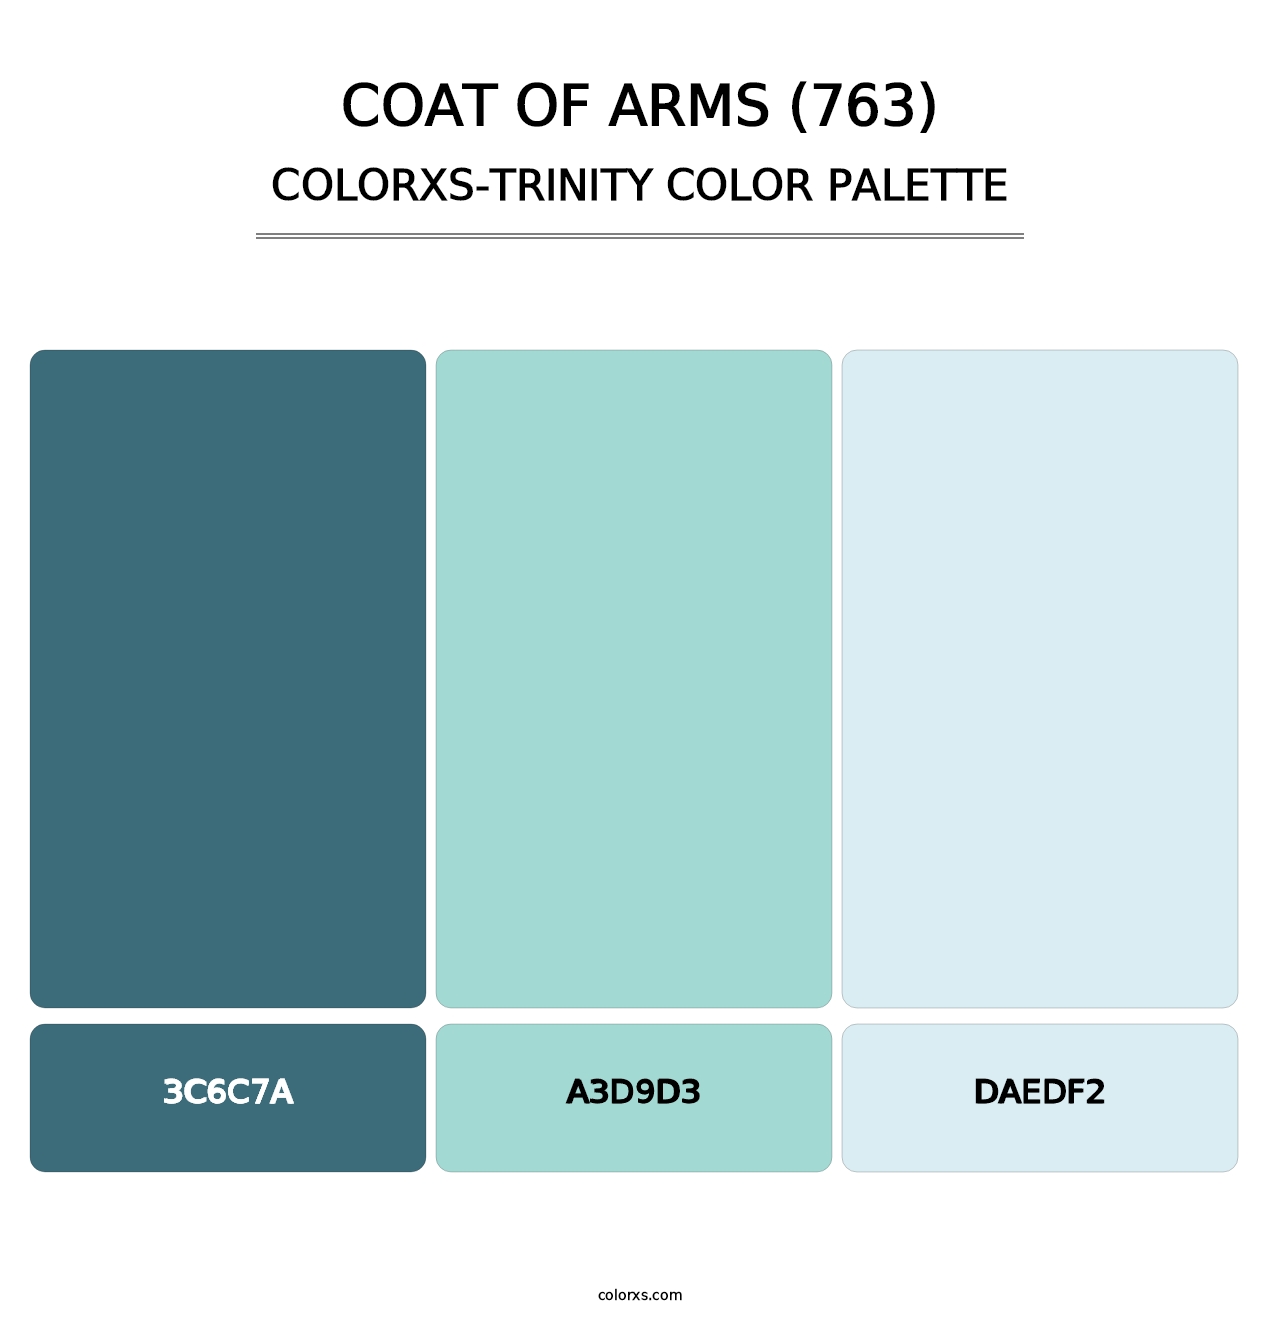 Coat of Arms (763) - Colorxs Trinity Palette